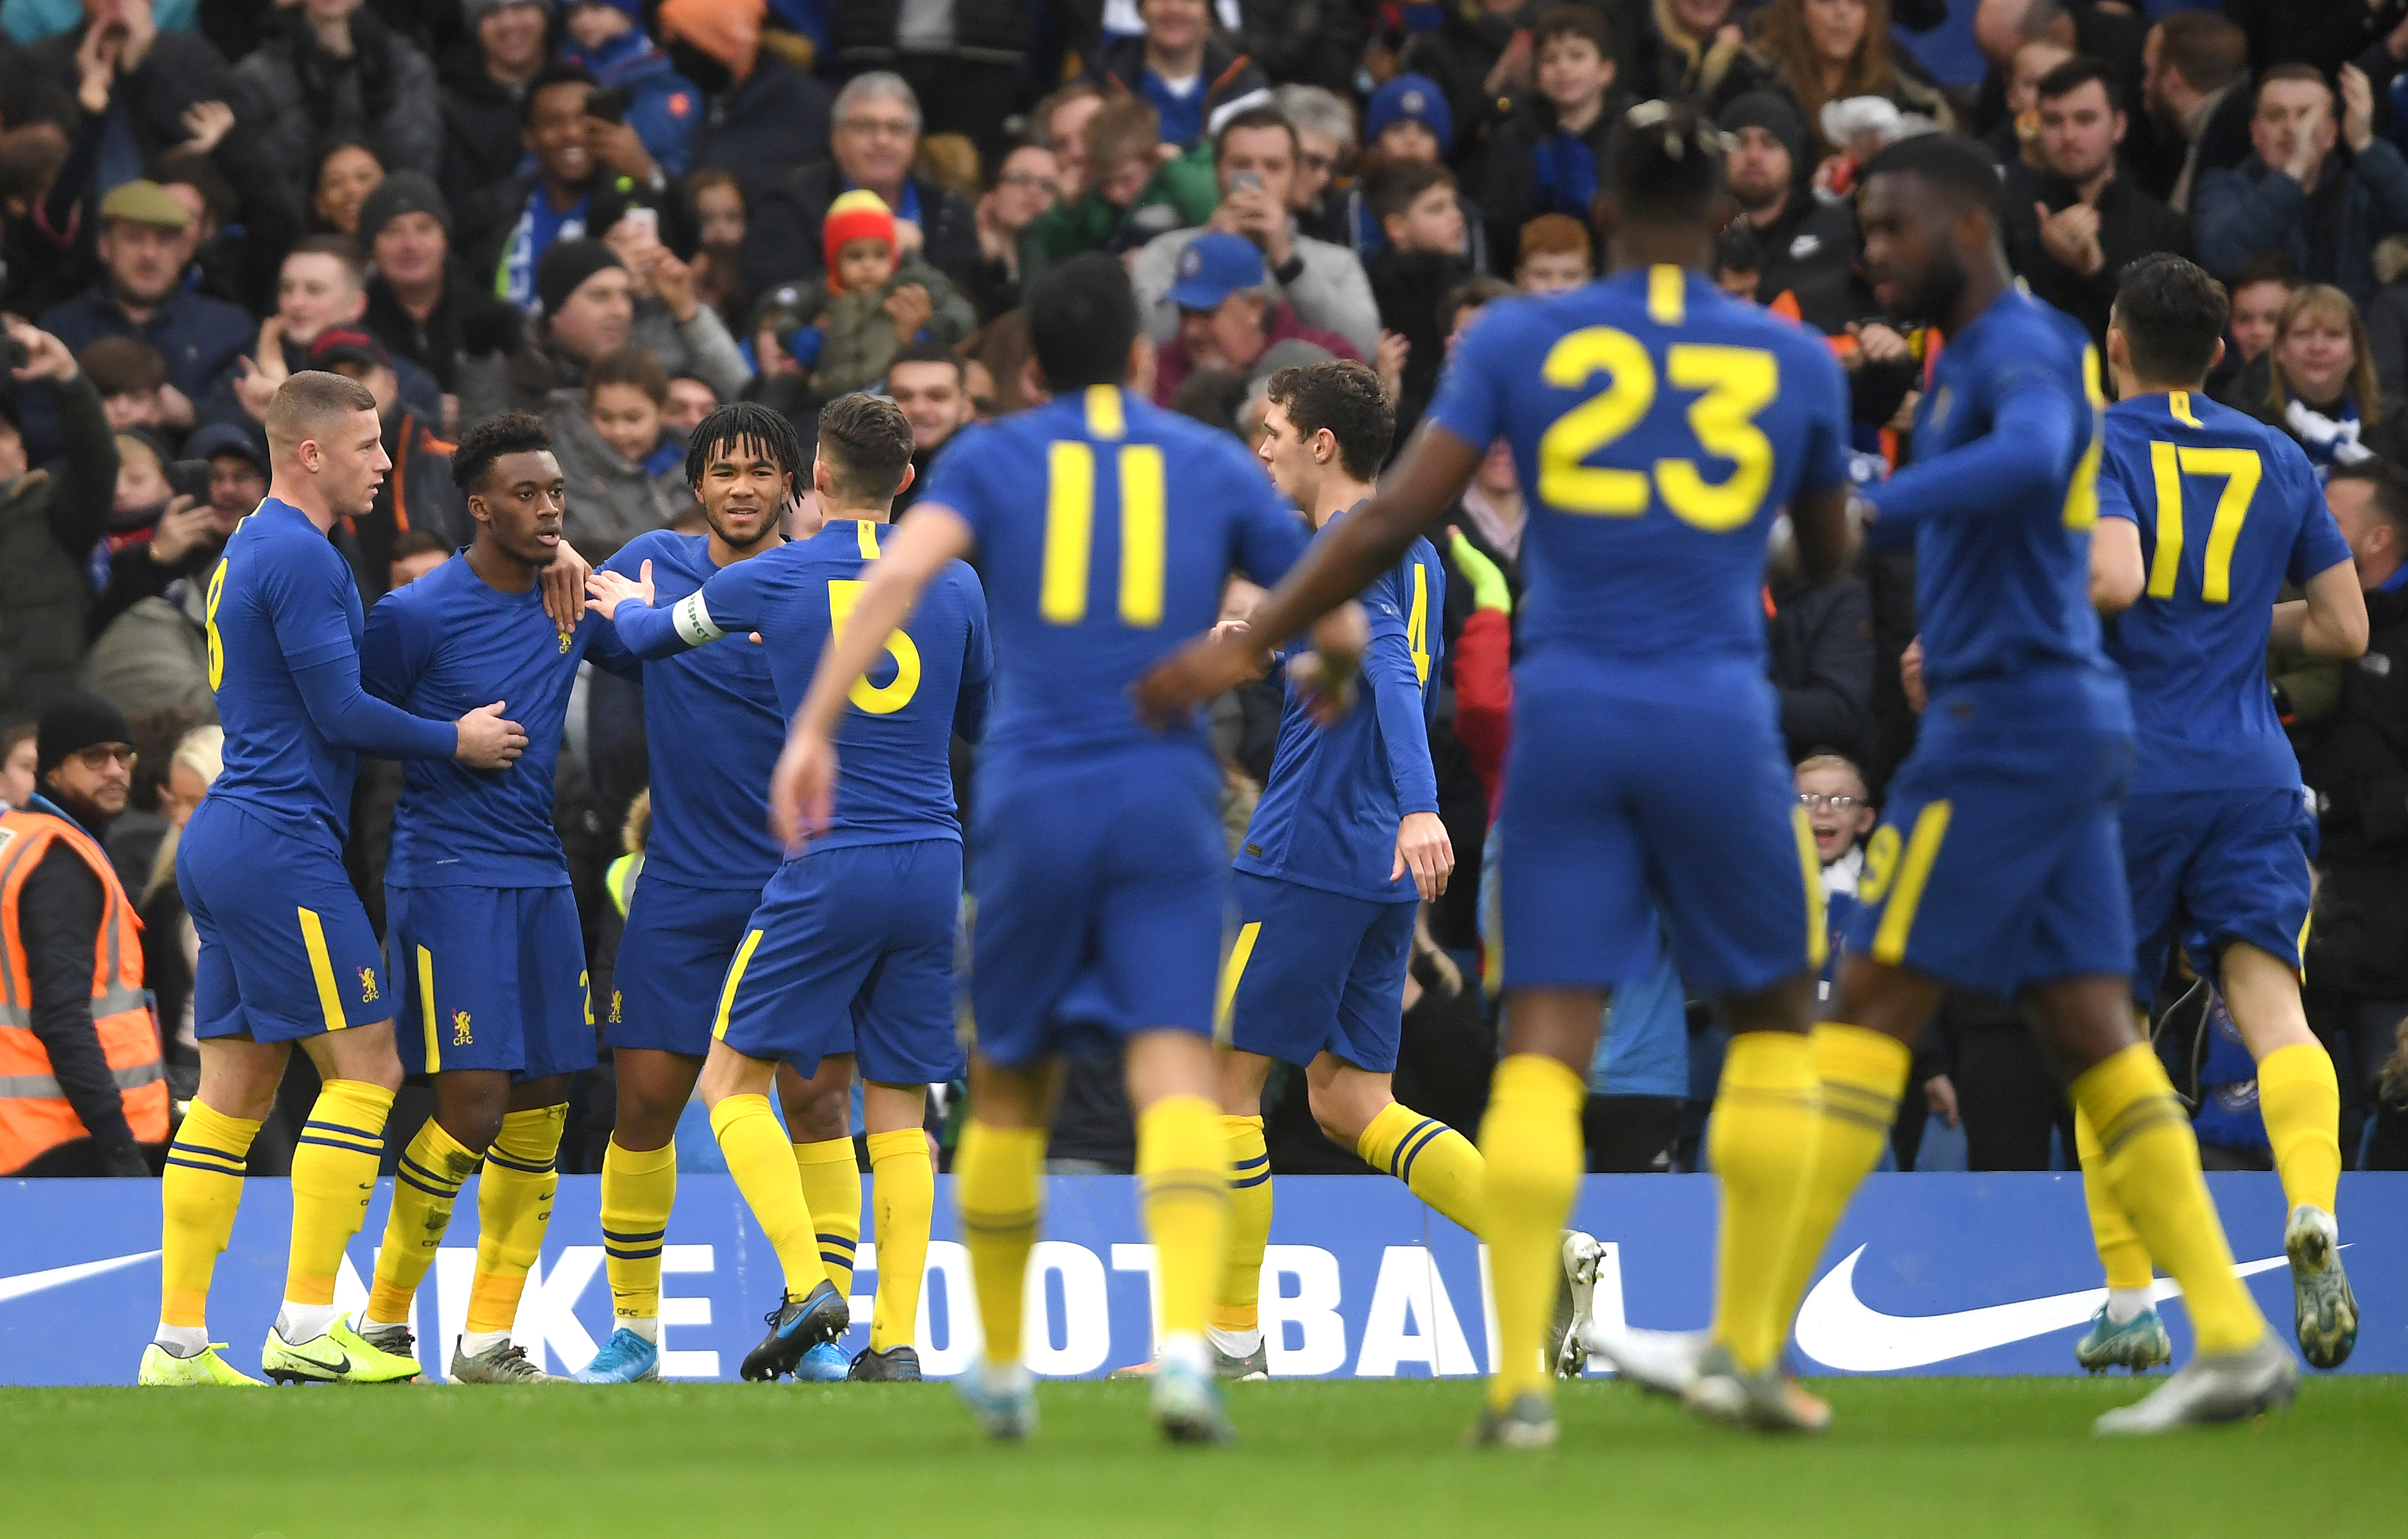 LONDON, ENGLAND - JANUARY 05: Callum Hudson-Odoi of Chelsea celebrates with teammates after scoring his team's first goal during the FA Cup Third Round match between Chelsea and Nottingham Forest at Stamford Bridge on January 05, 2020 in London, England. (Photo by Mike Hewitt/Getty Images)